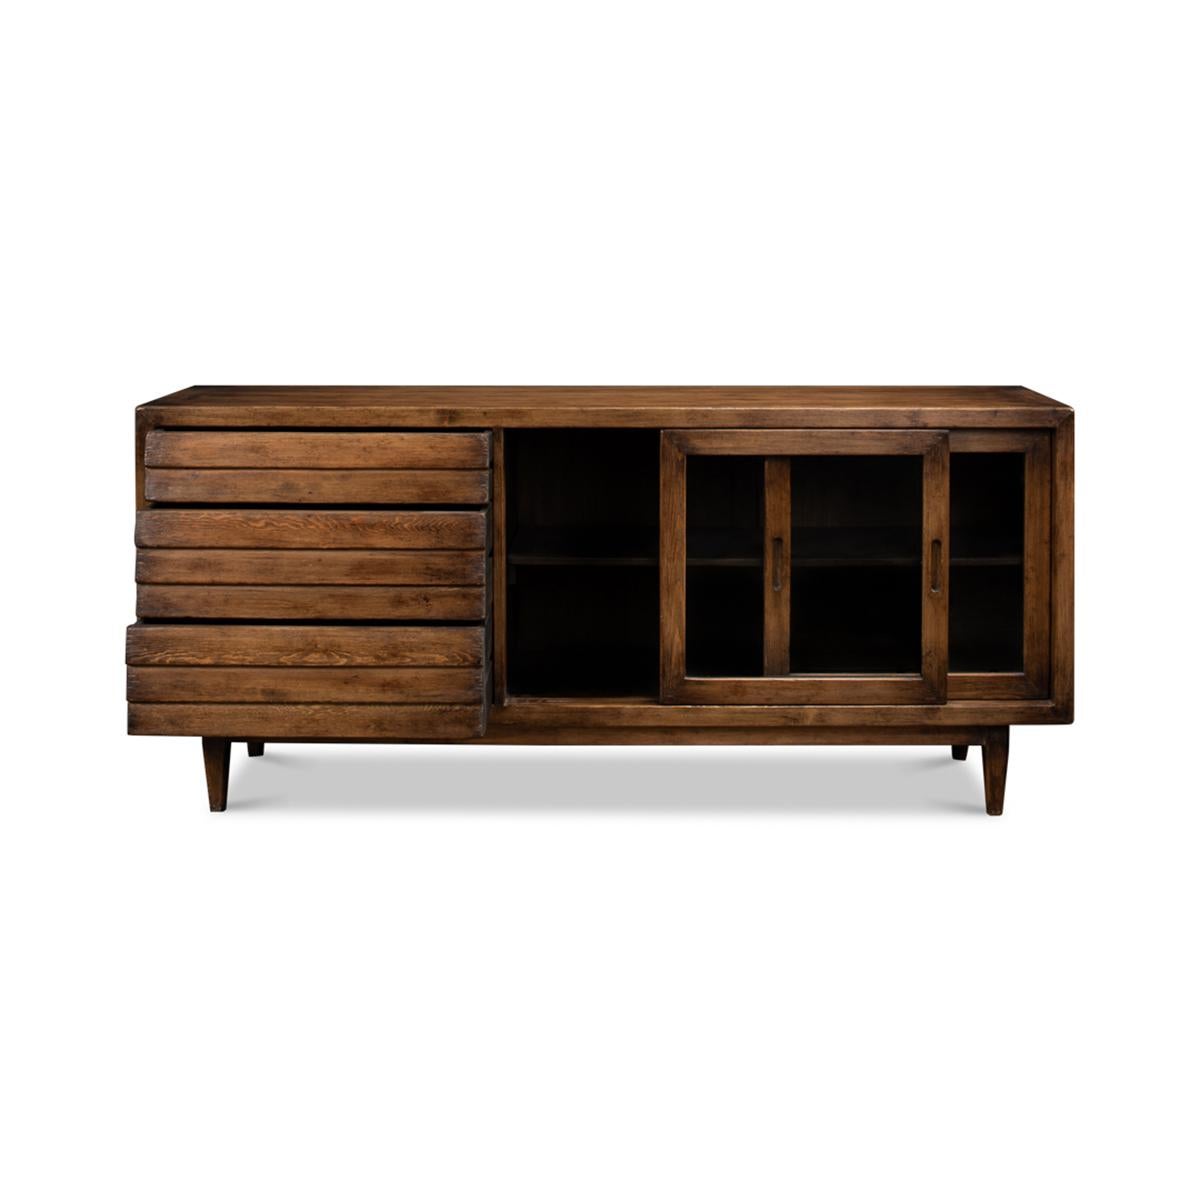 Asian Rustic Reclaimed Pine Credenza For Sale